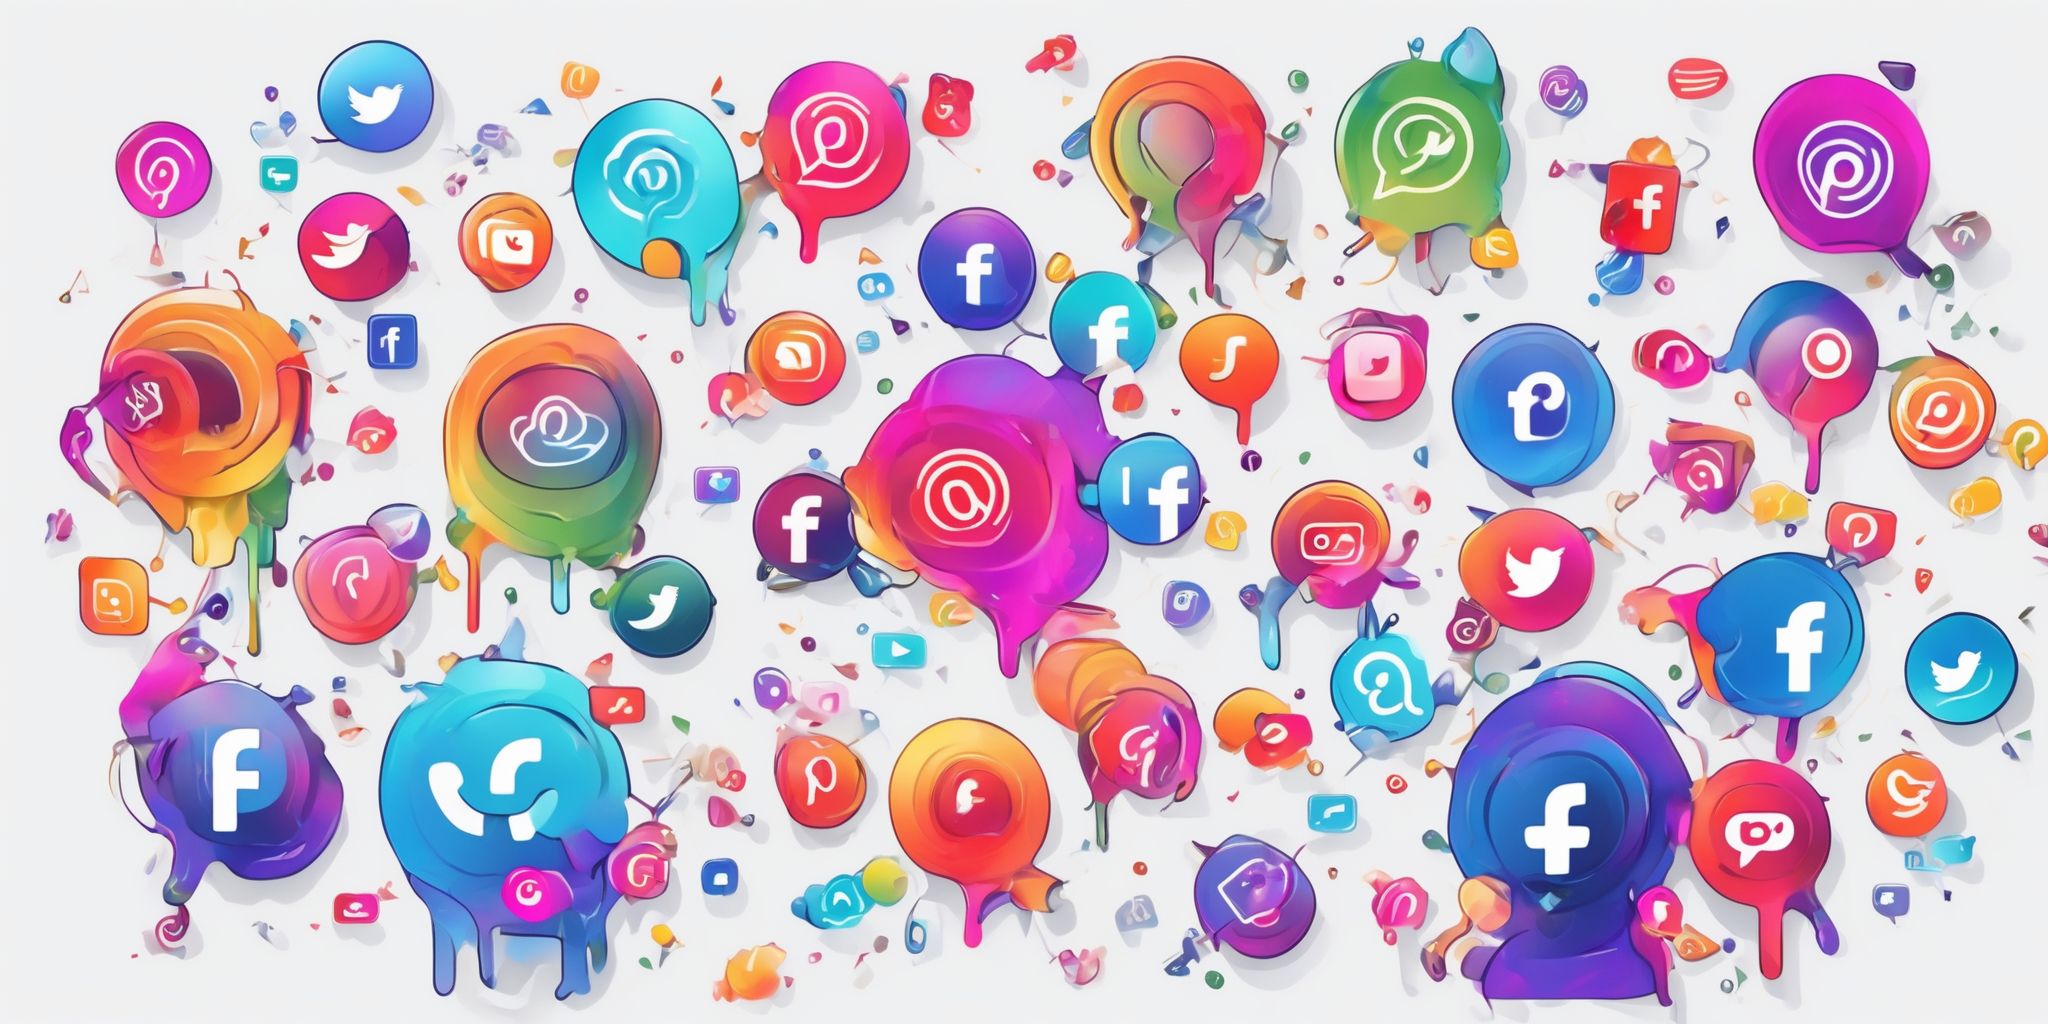 Social media frenzy in illustration style with gradients and white background